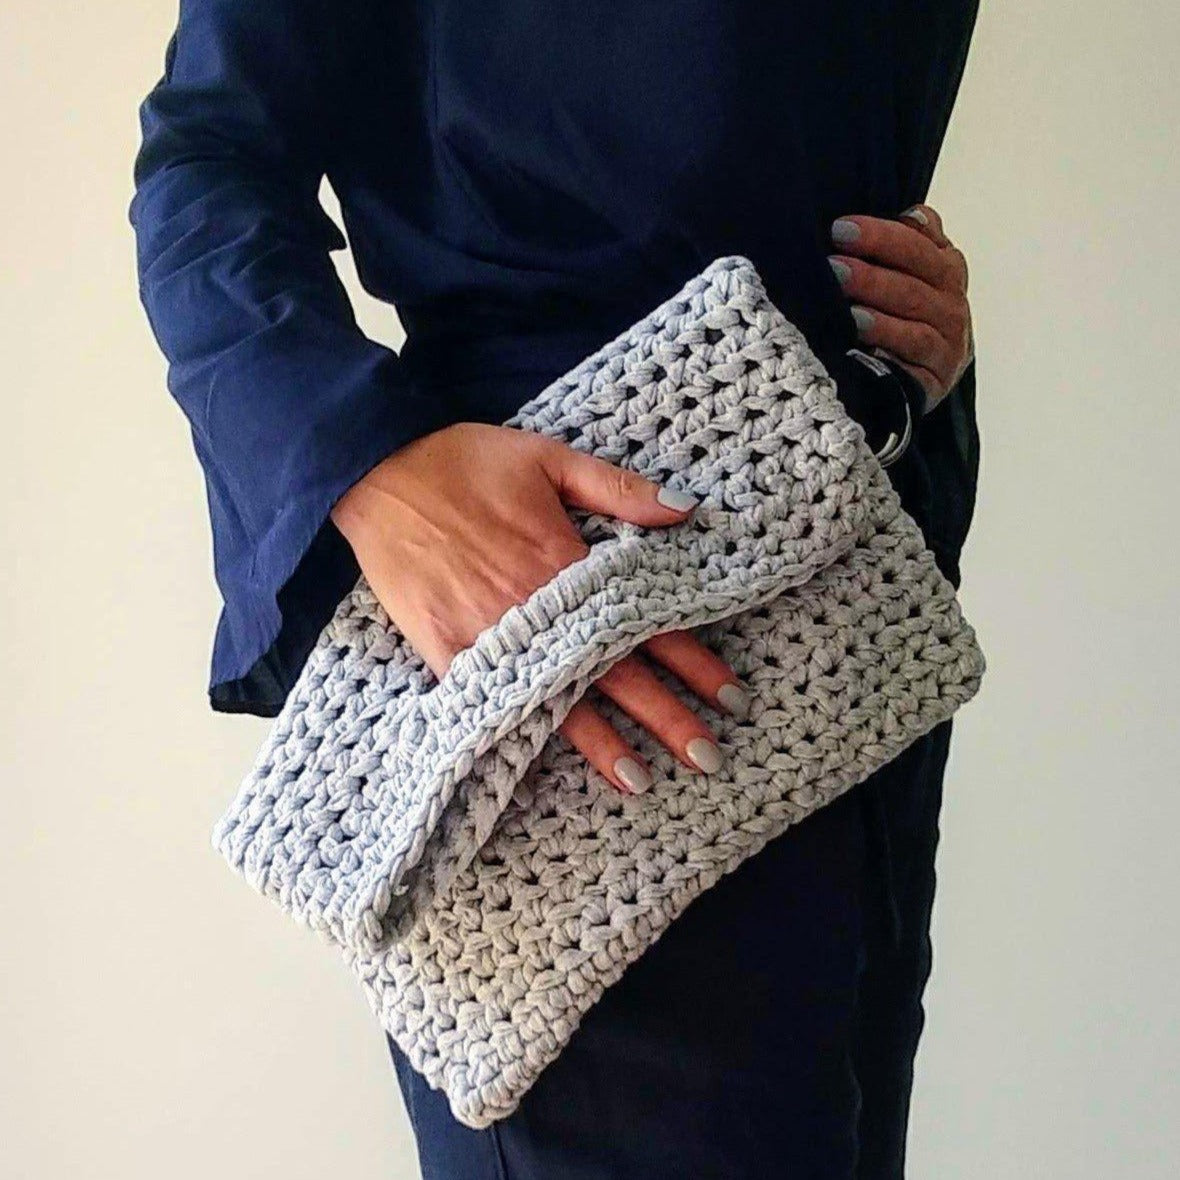 Crochet Pattern - Tote Bag - T shirt Yarn | Curiously Contrary